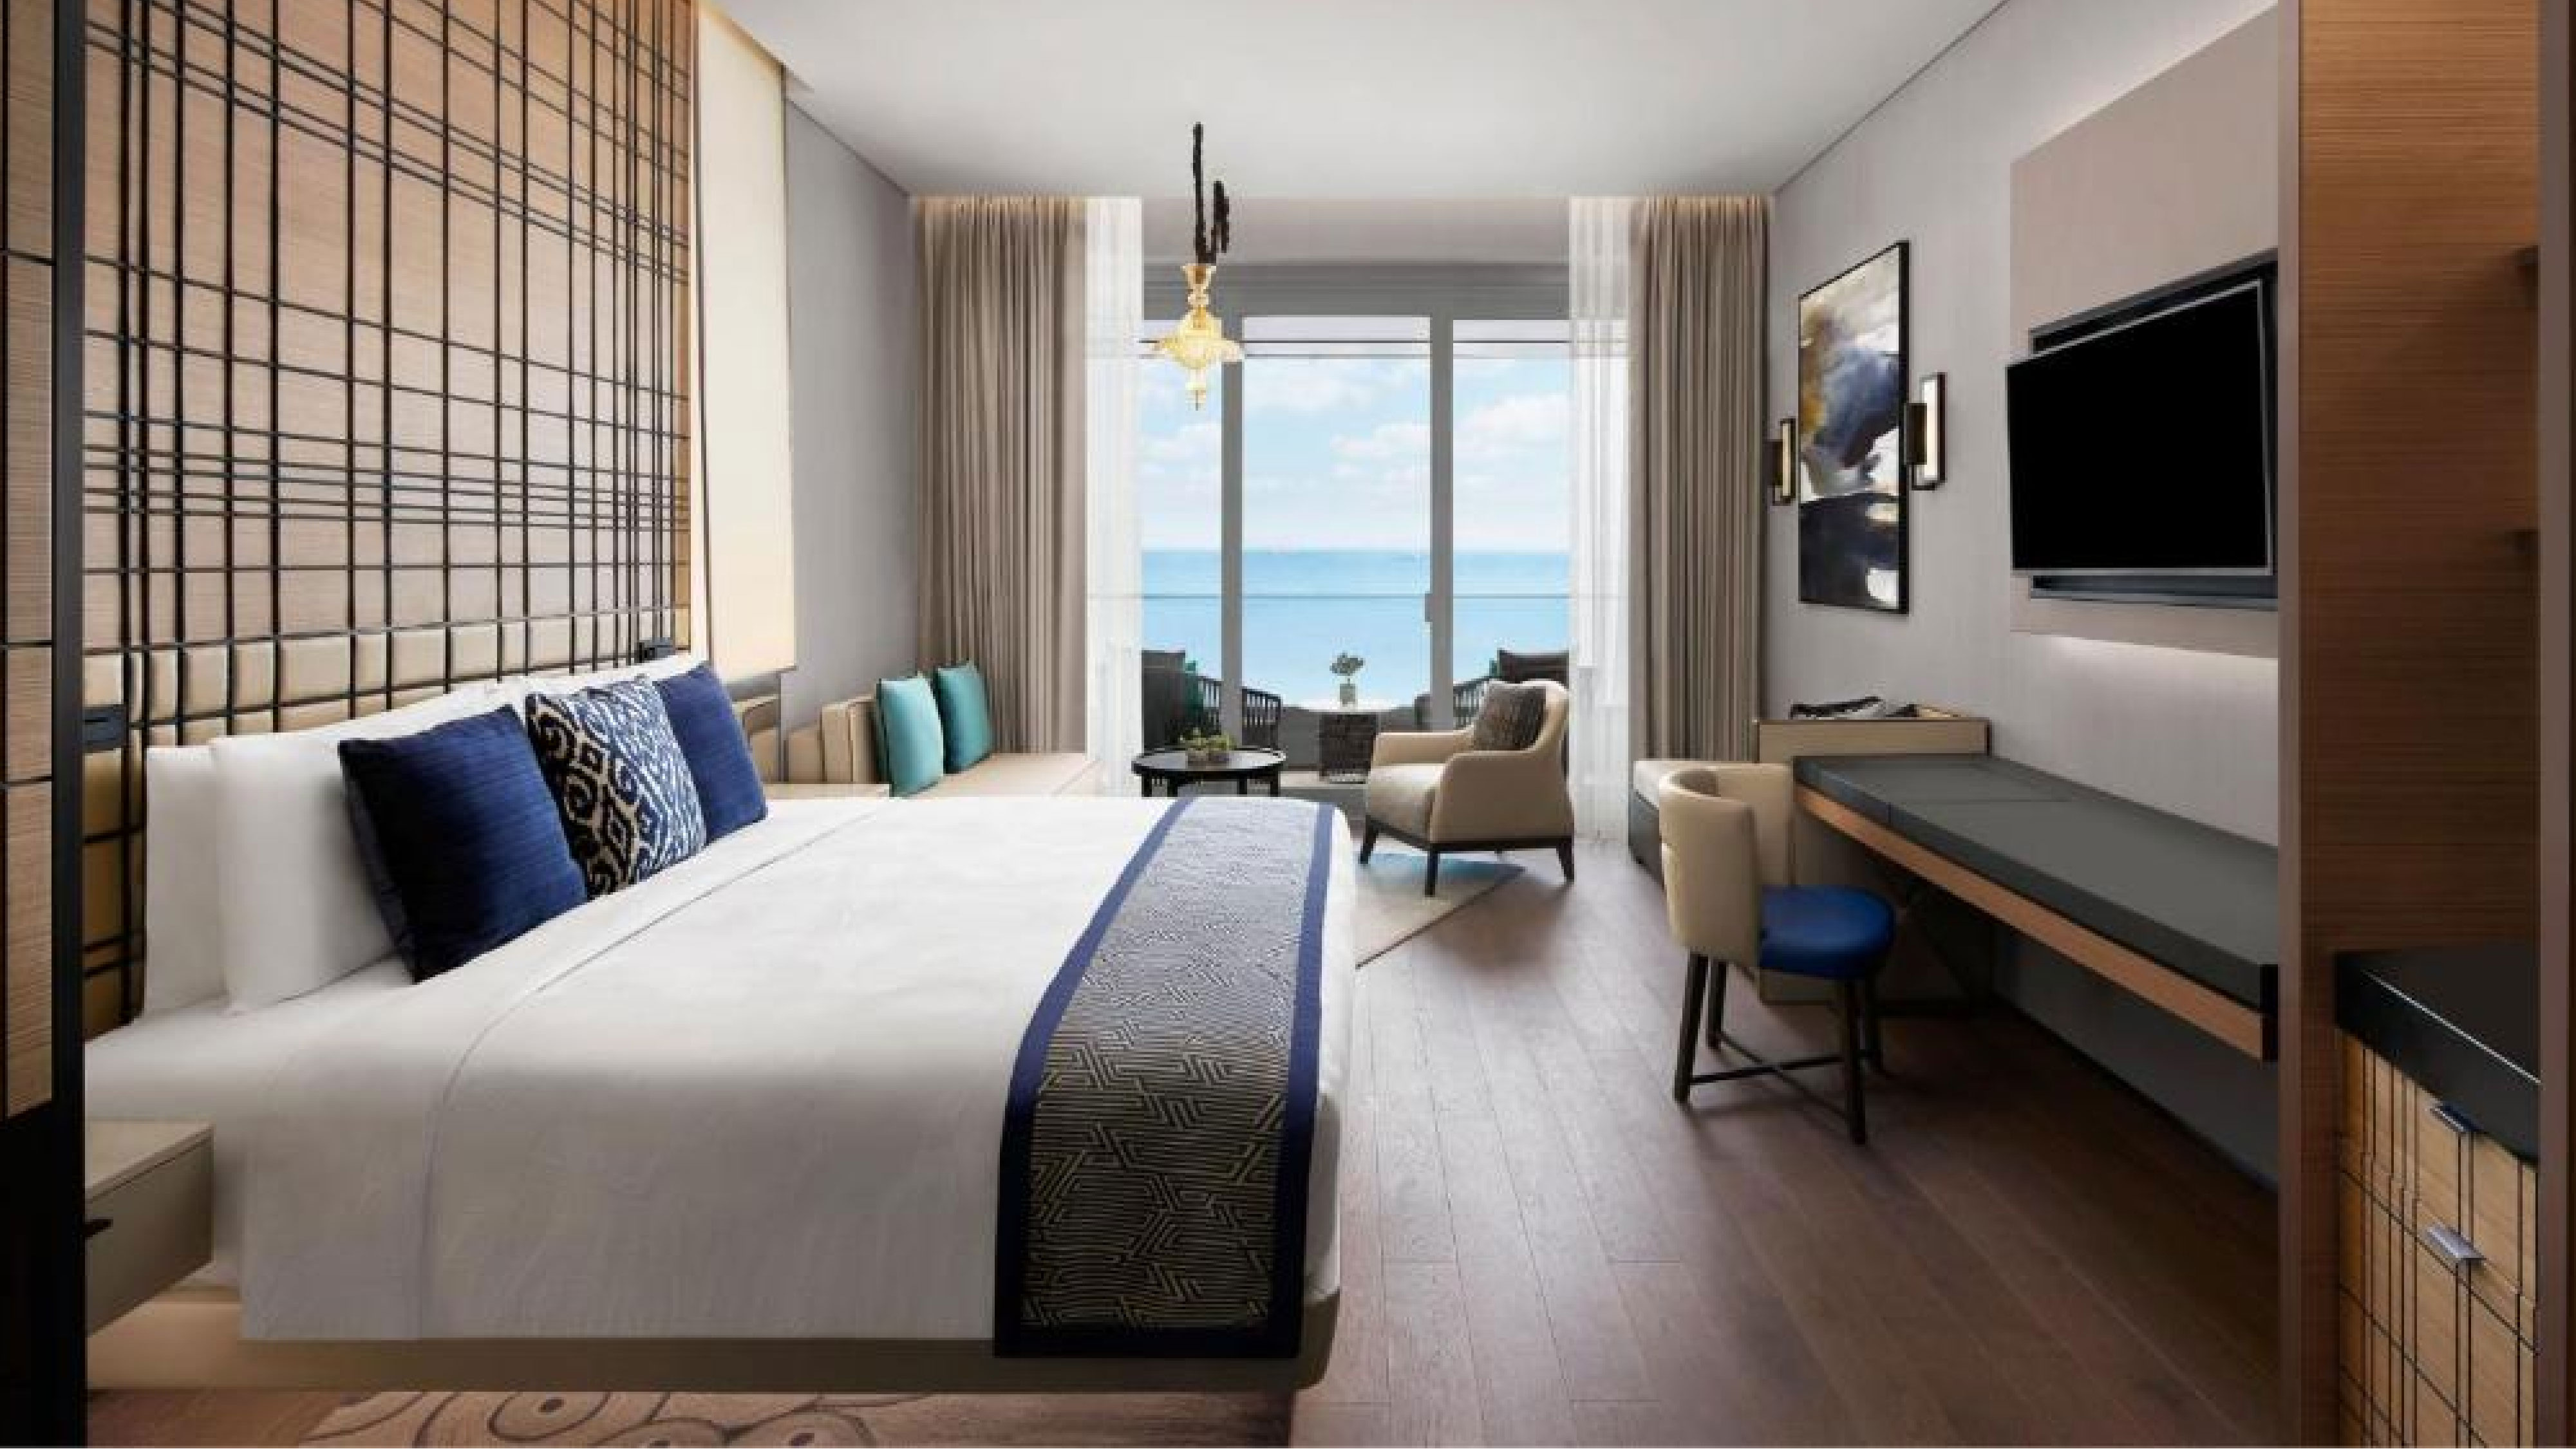 Deluxe King Room with Balcony and Sea View